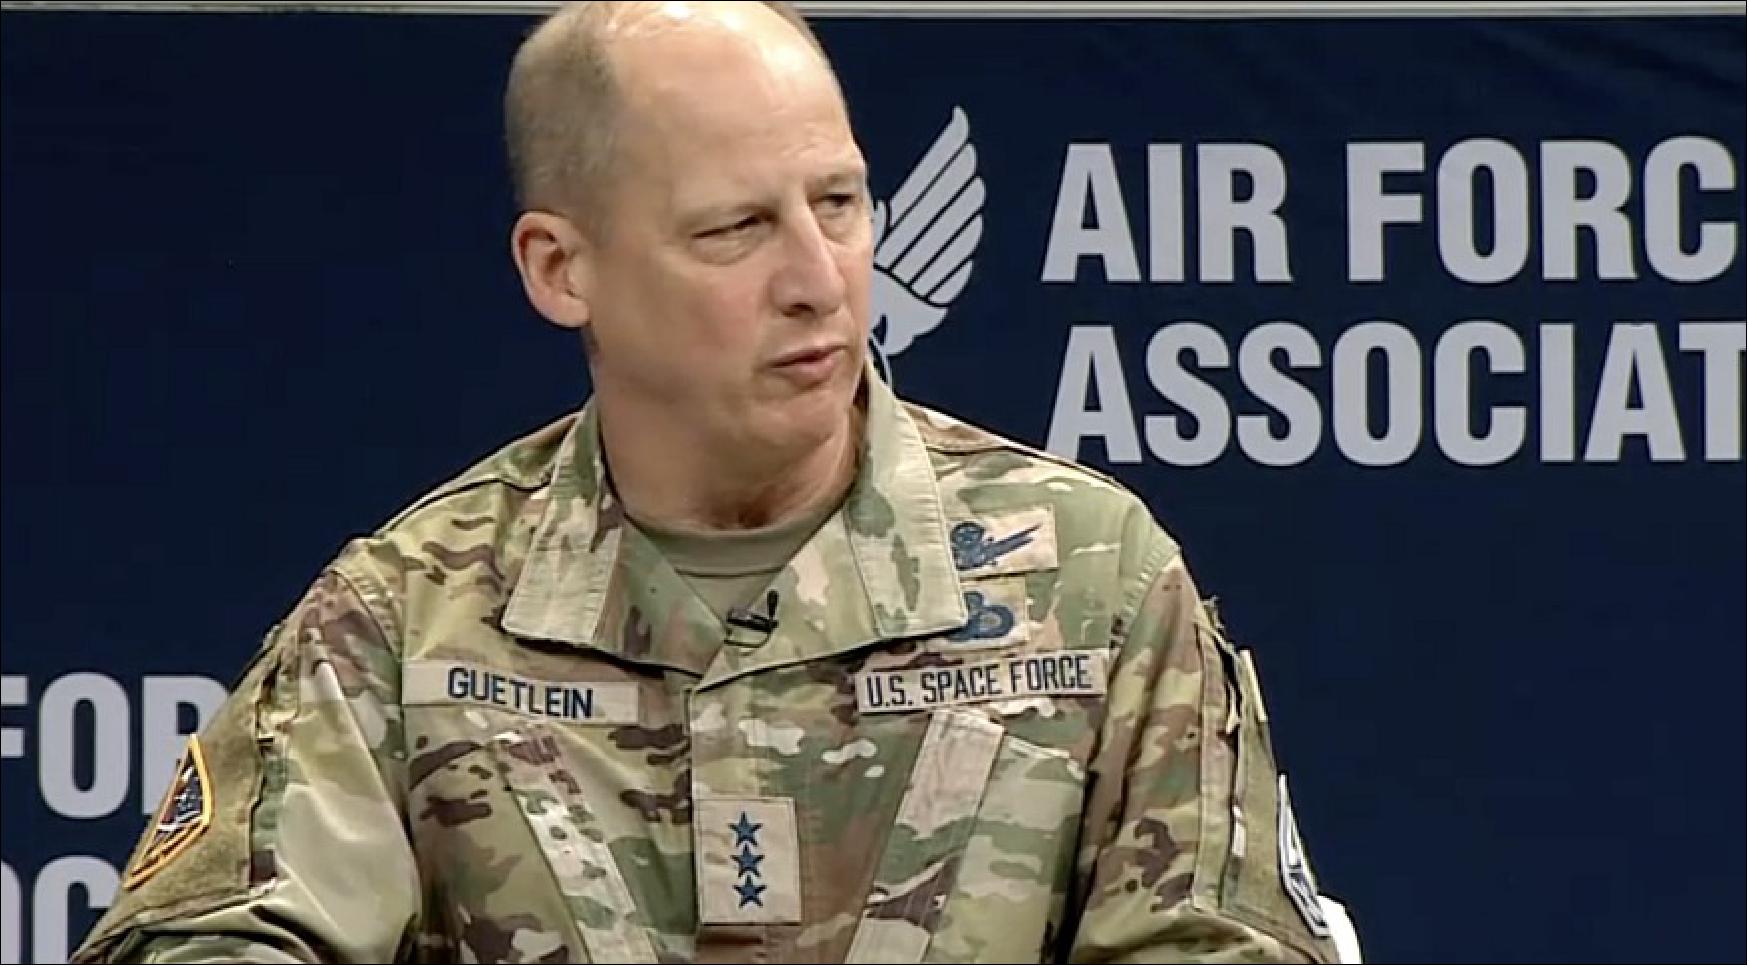 Figure 21: The commander of U.S. Space Systems Command Lt. Gen. Michael Guetlein speaks March 4, 2022, at the Air Force Association's Air Warfare Symposium (image credit: AFA)